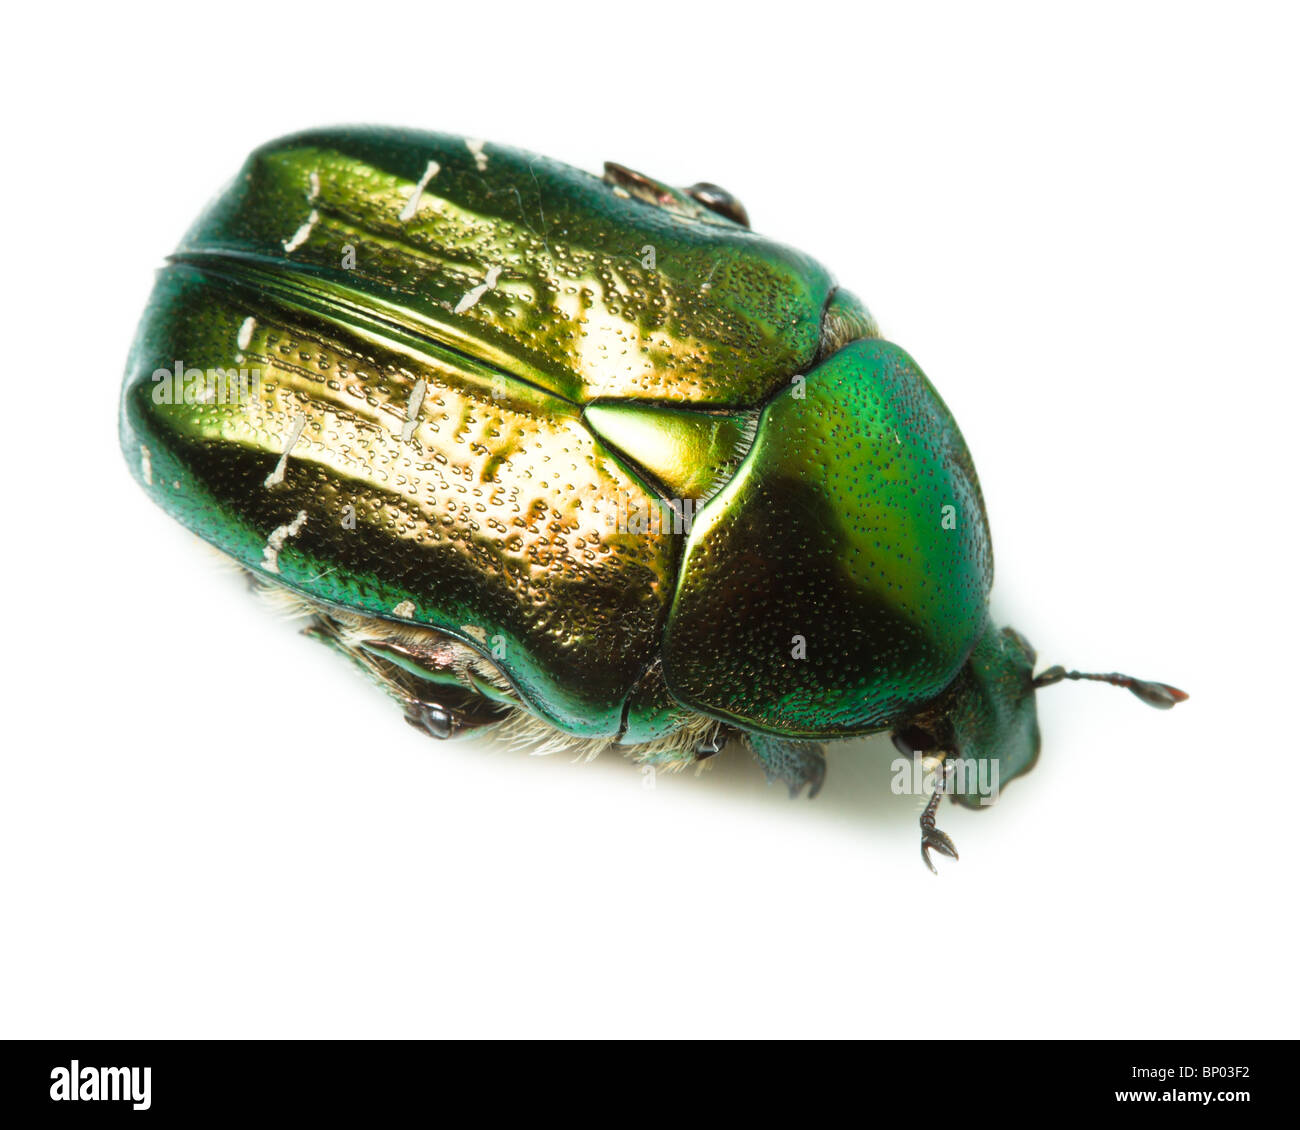 Beetle in front of white background, isolated. Stock Photo